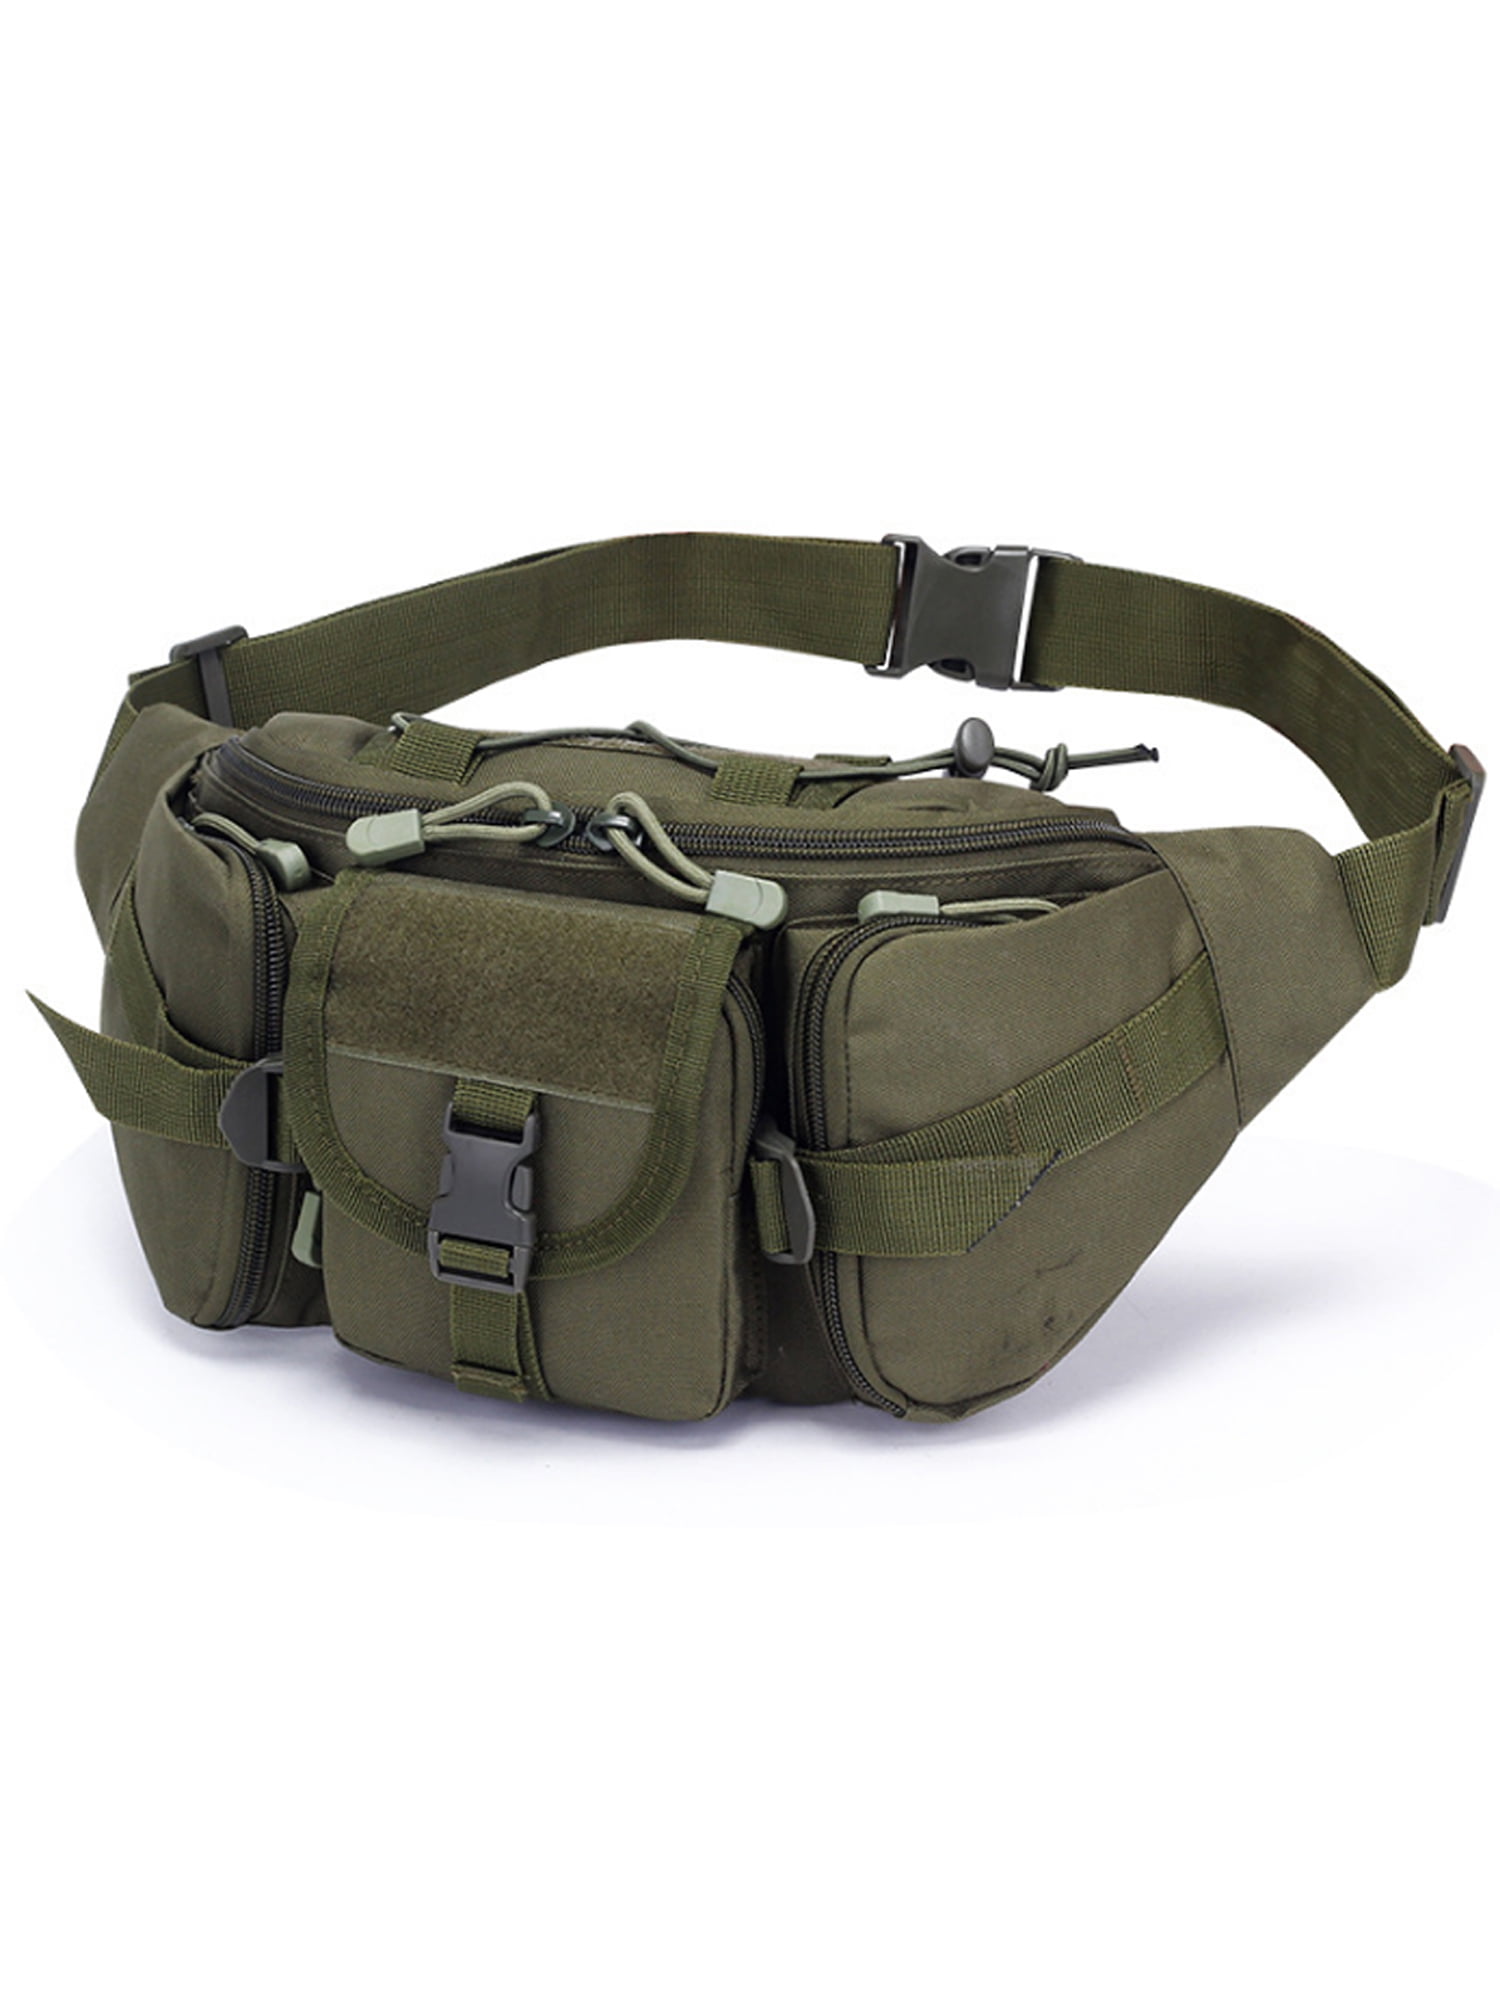 Outdoor Mens Tactical Water Bottle Fanny Pack Waist Bags Molle Travel Hiking Bum 